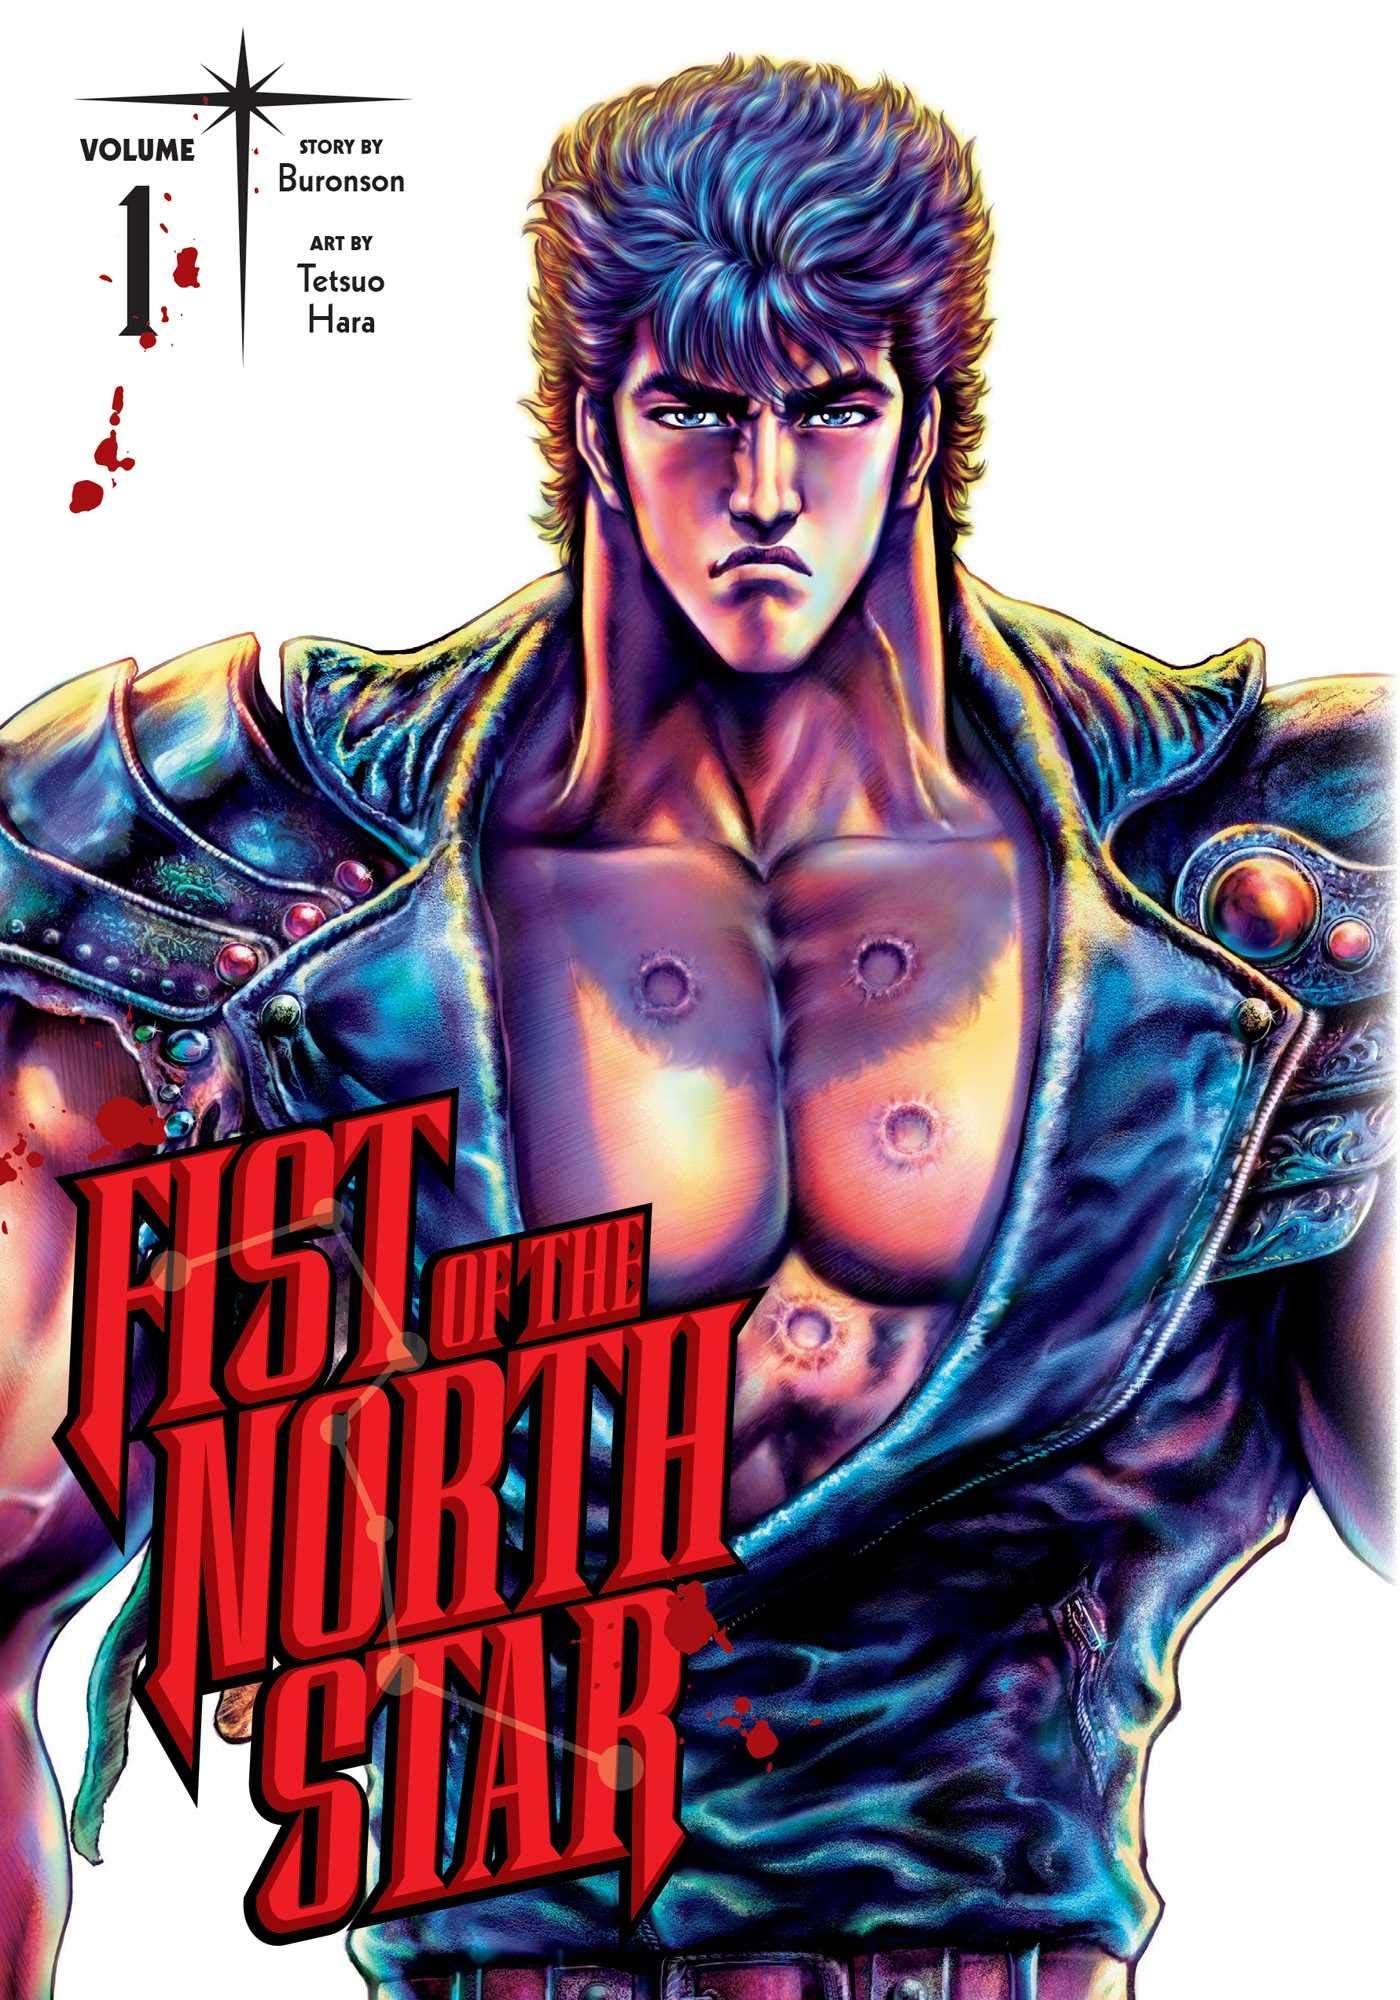 Kenshiro posing on the cover for the Fist of the North Star manga